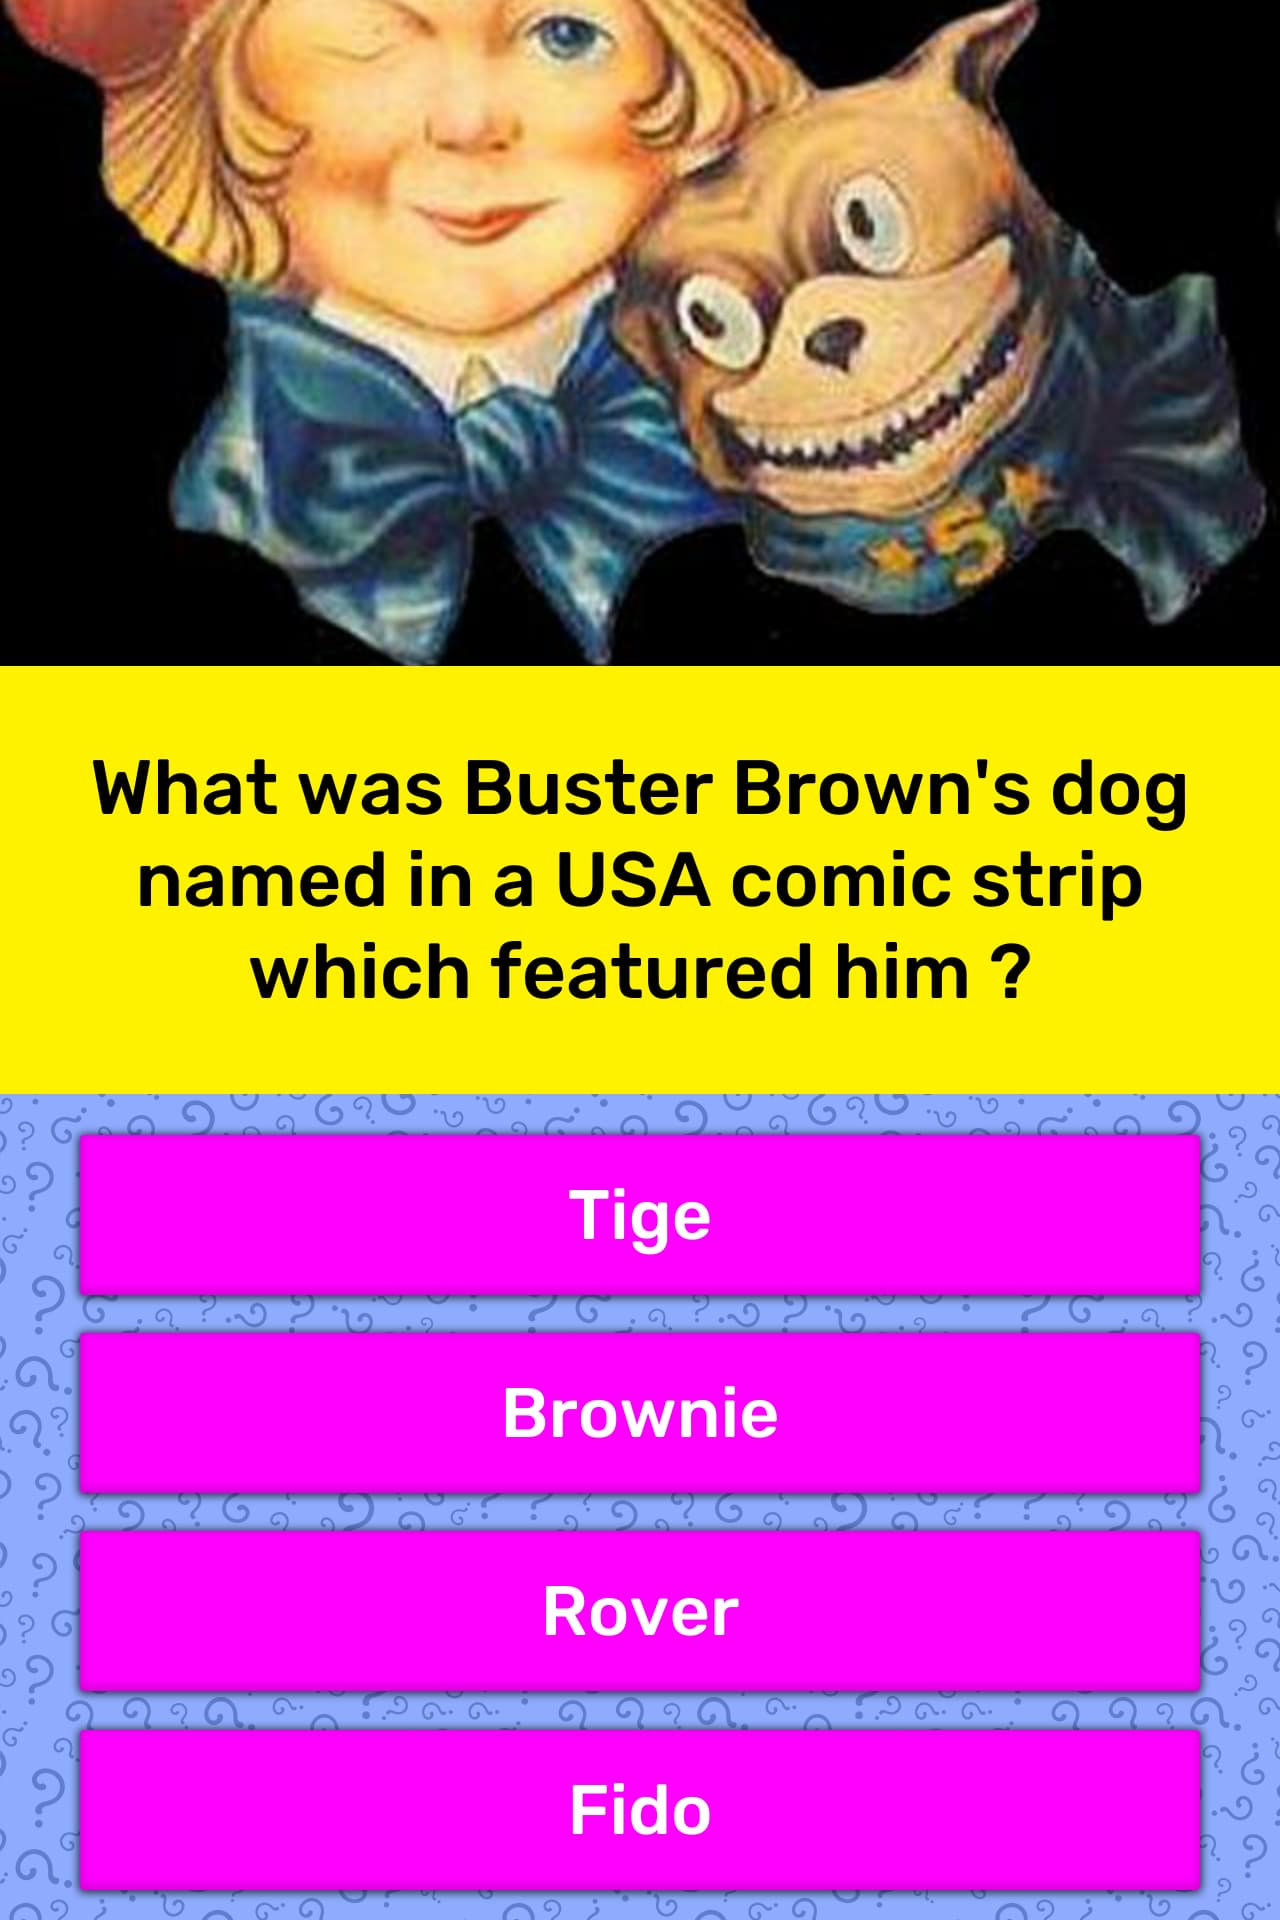 buster brown dog